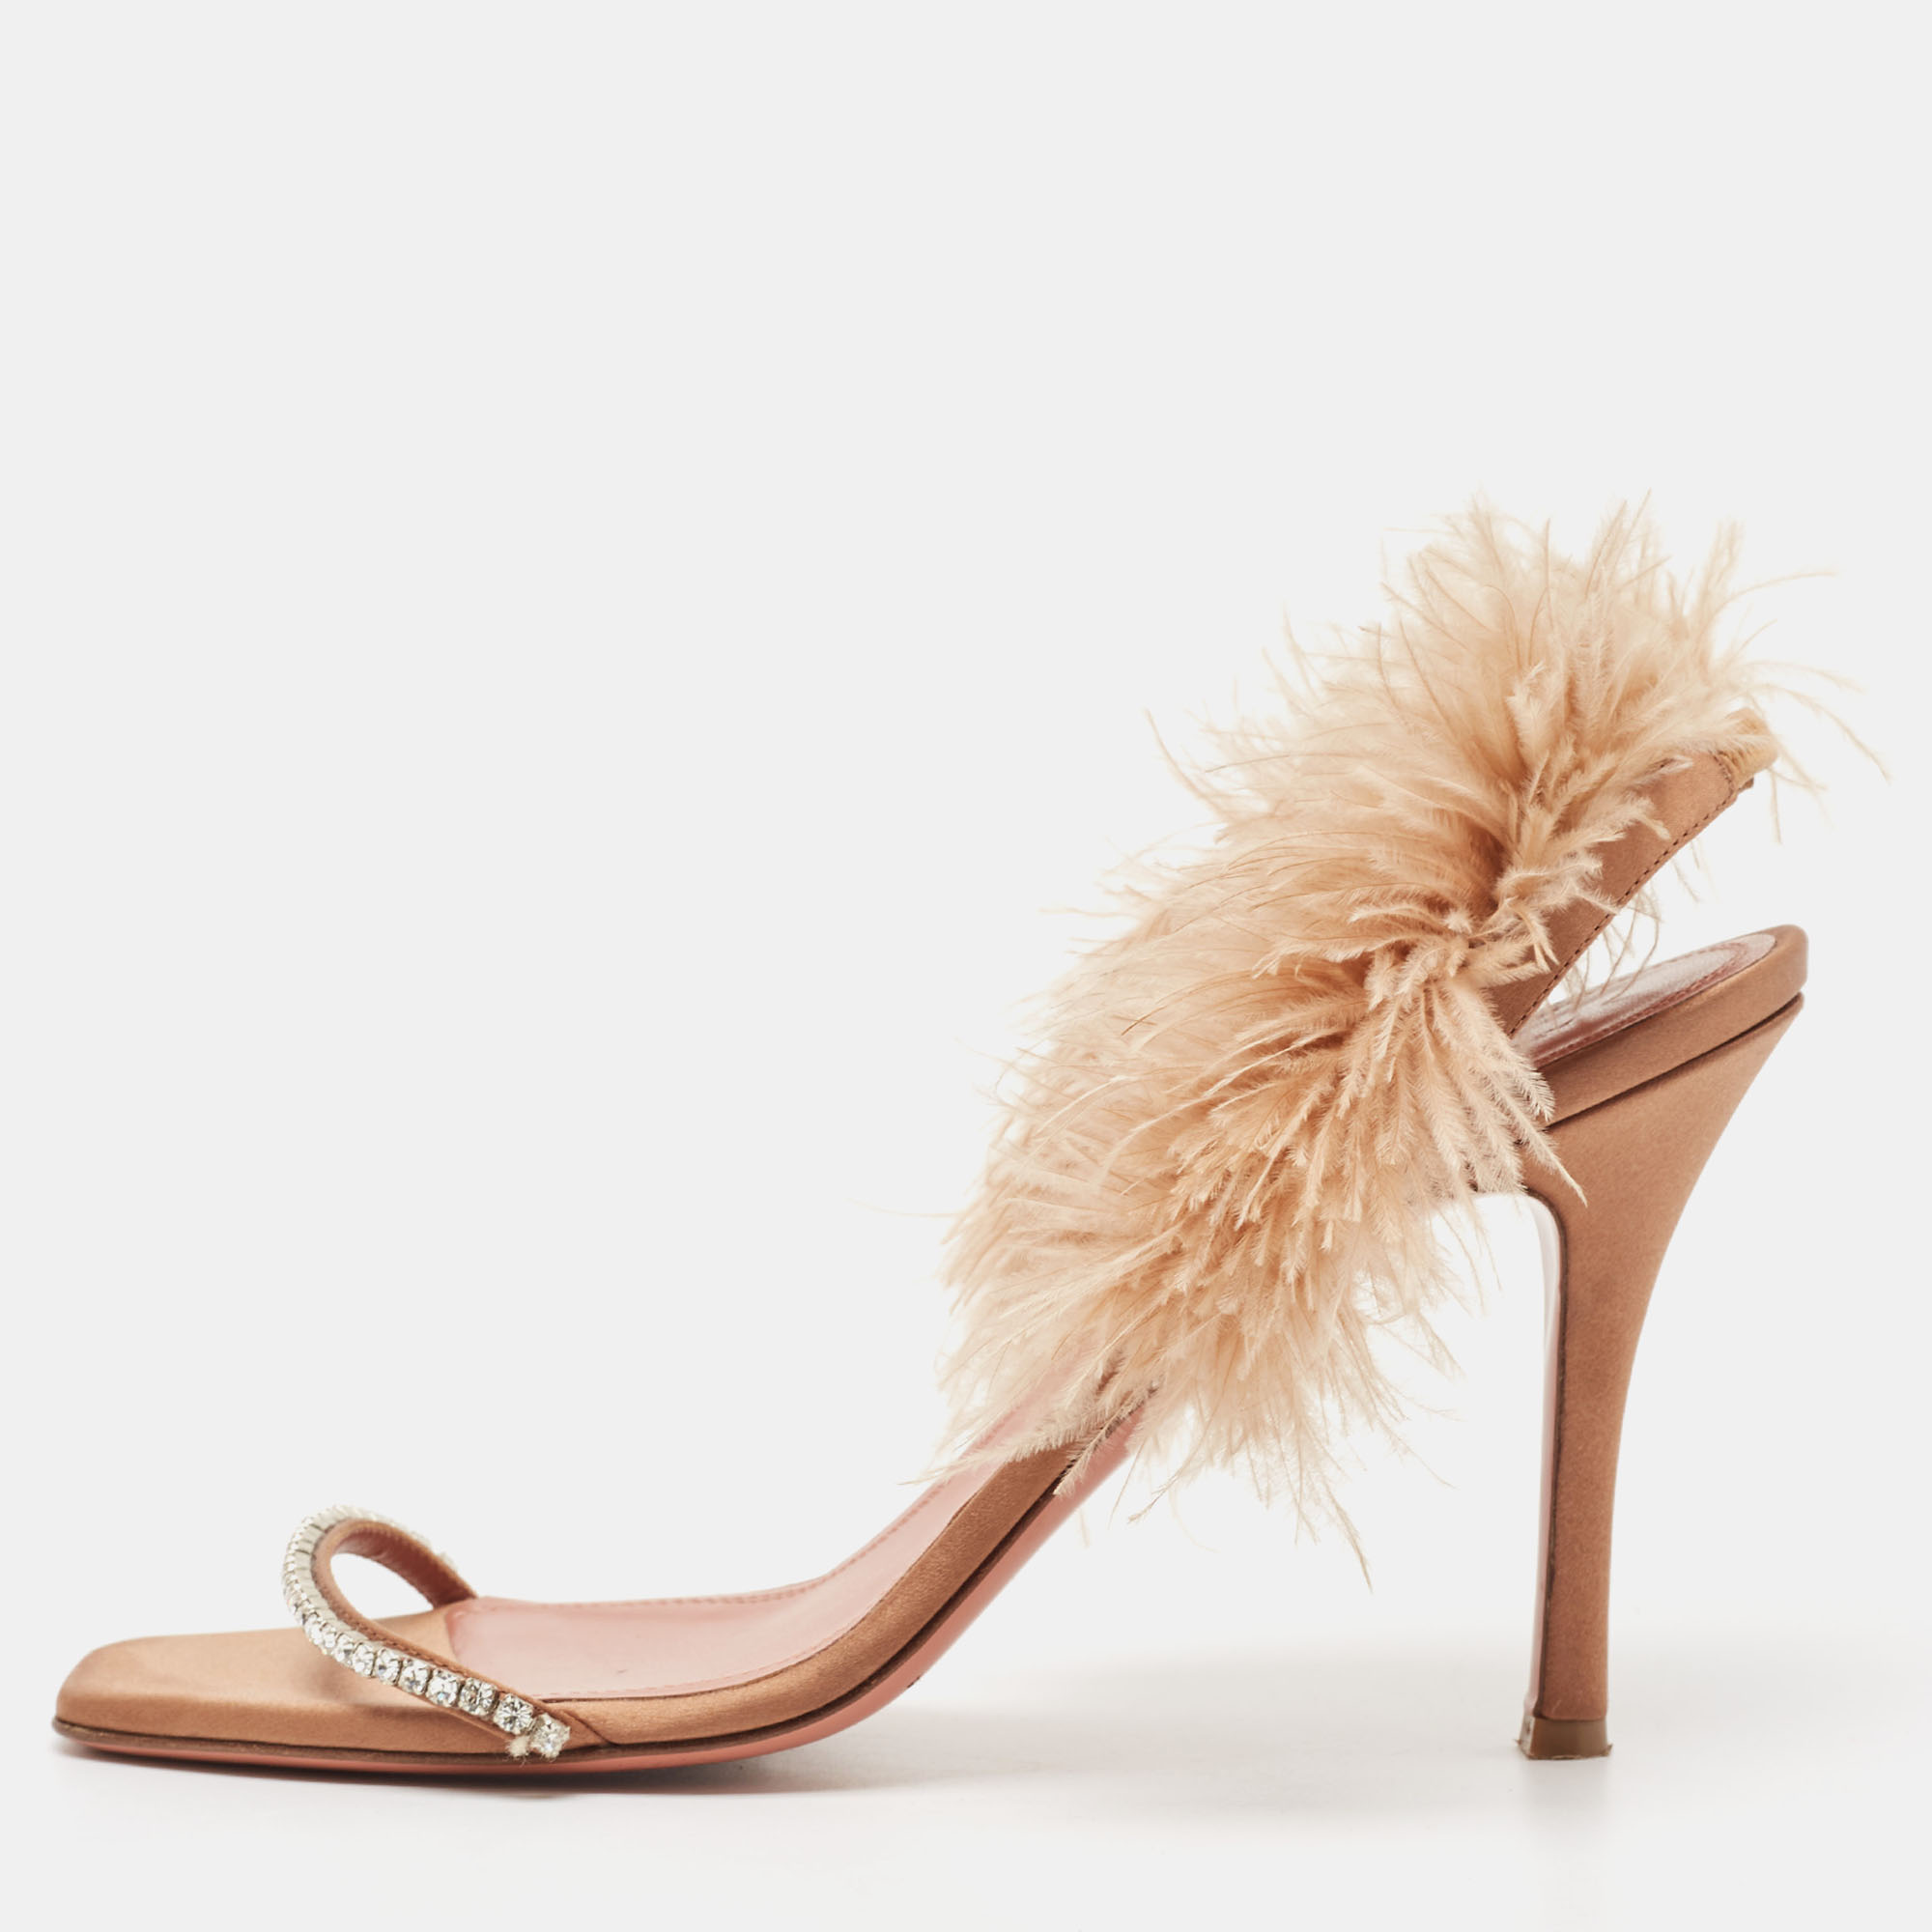 Pre-owned Amina Muaddi Brown Satin And Fur Adwoa Ankle Strap Sandals Size 42